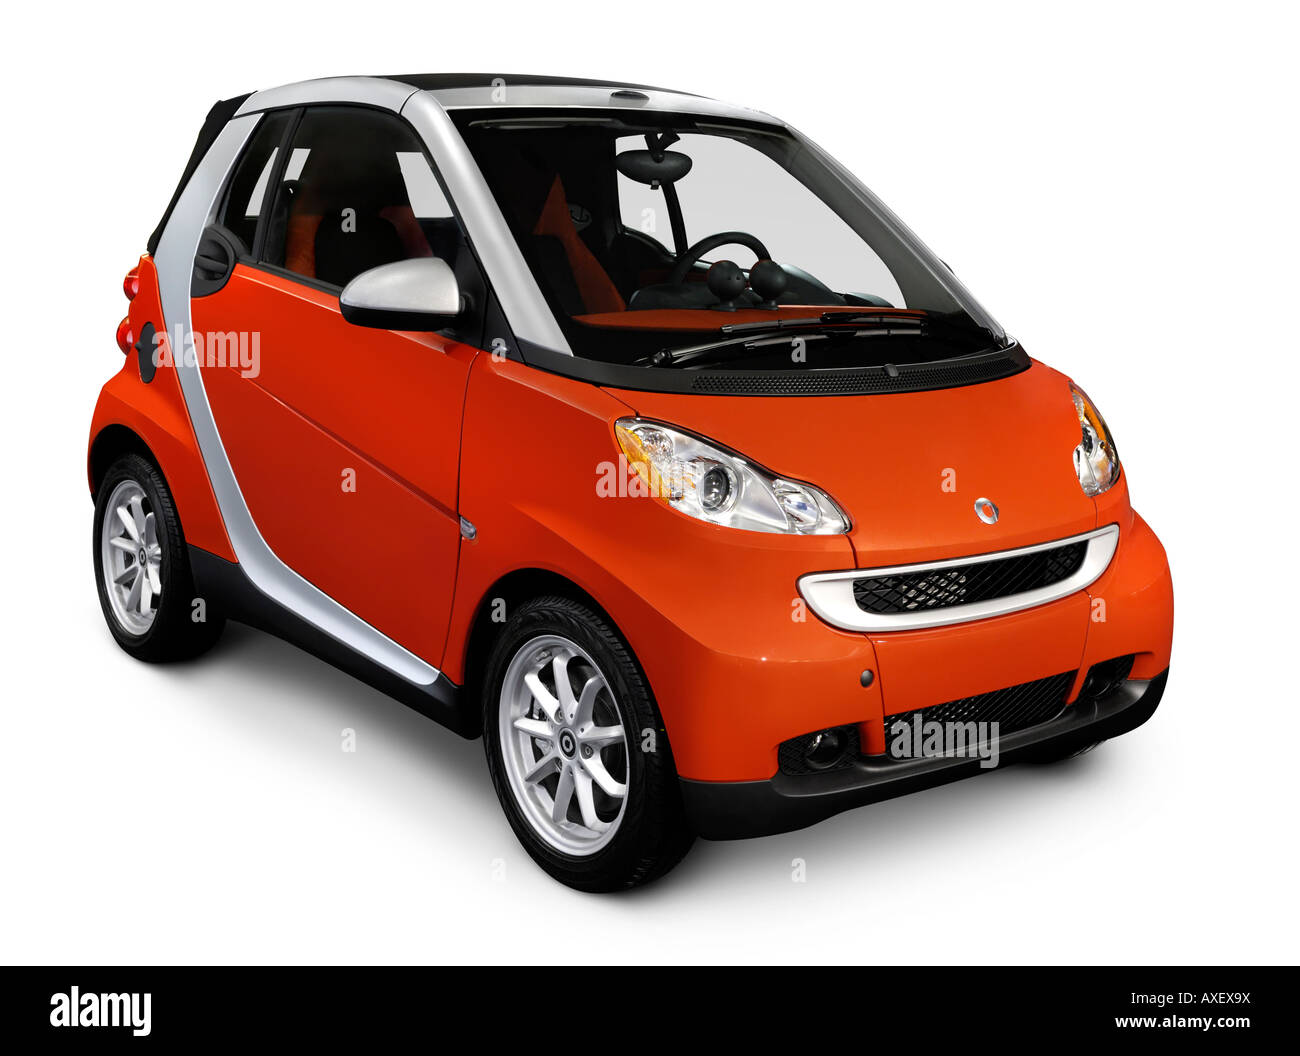 2008 Smart Fortwo city car Stock Photo